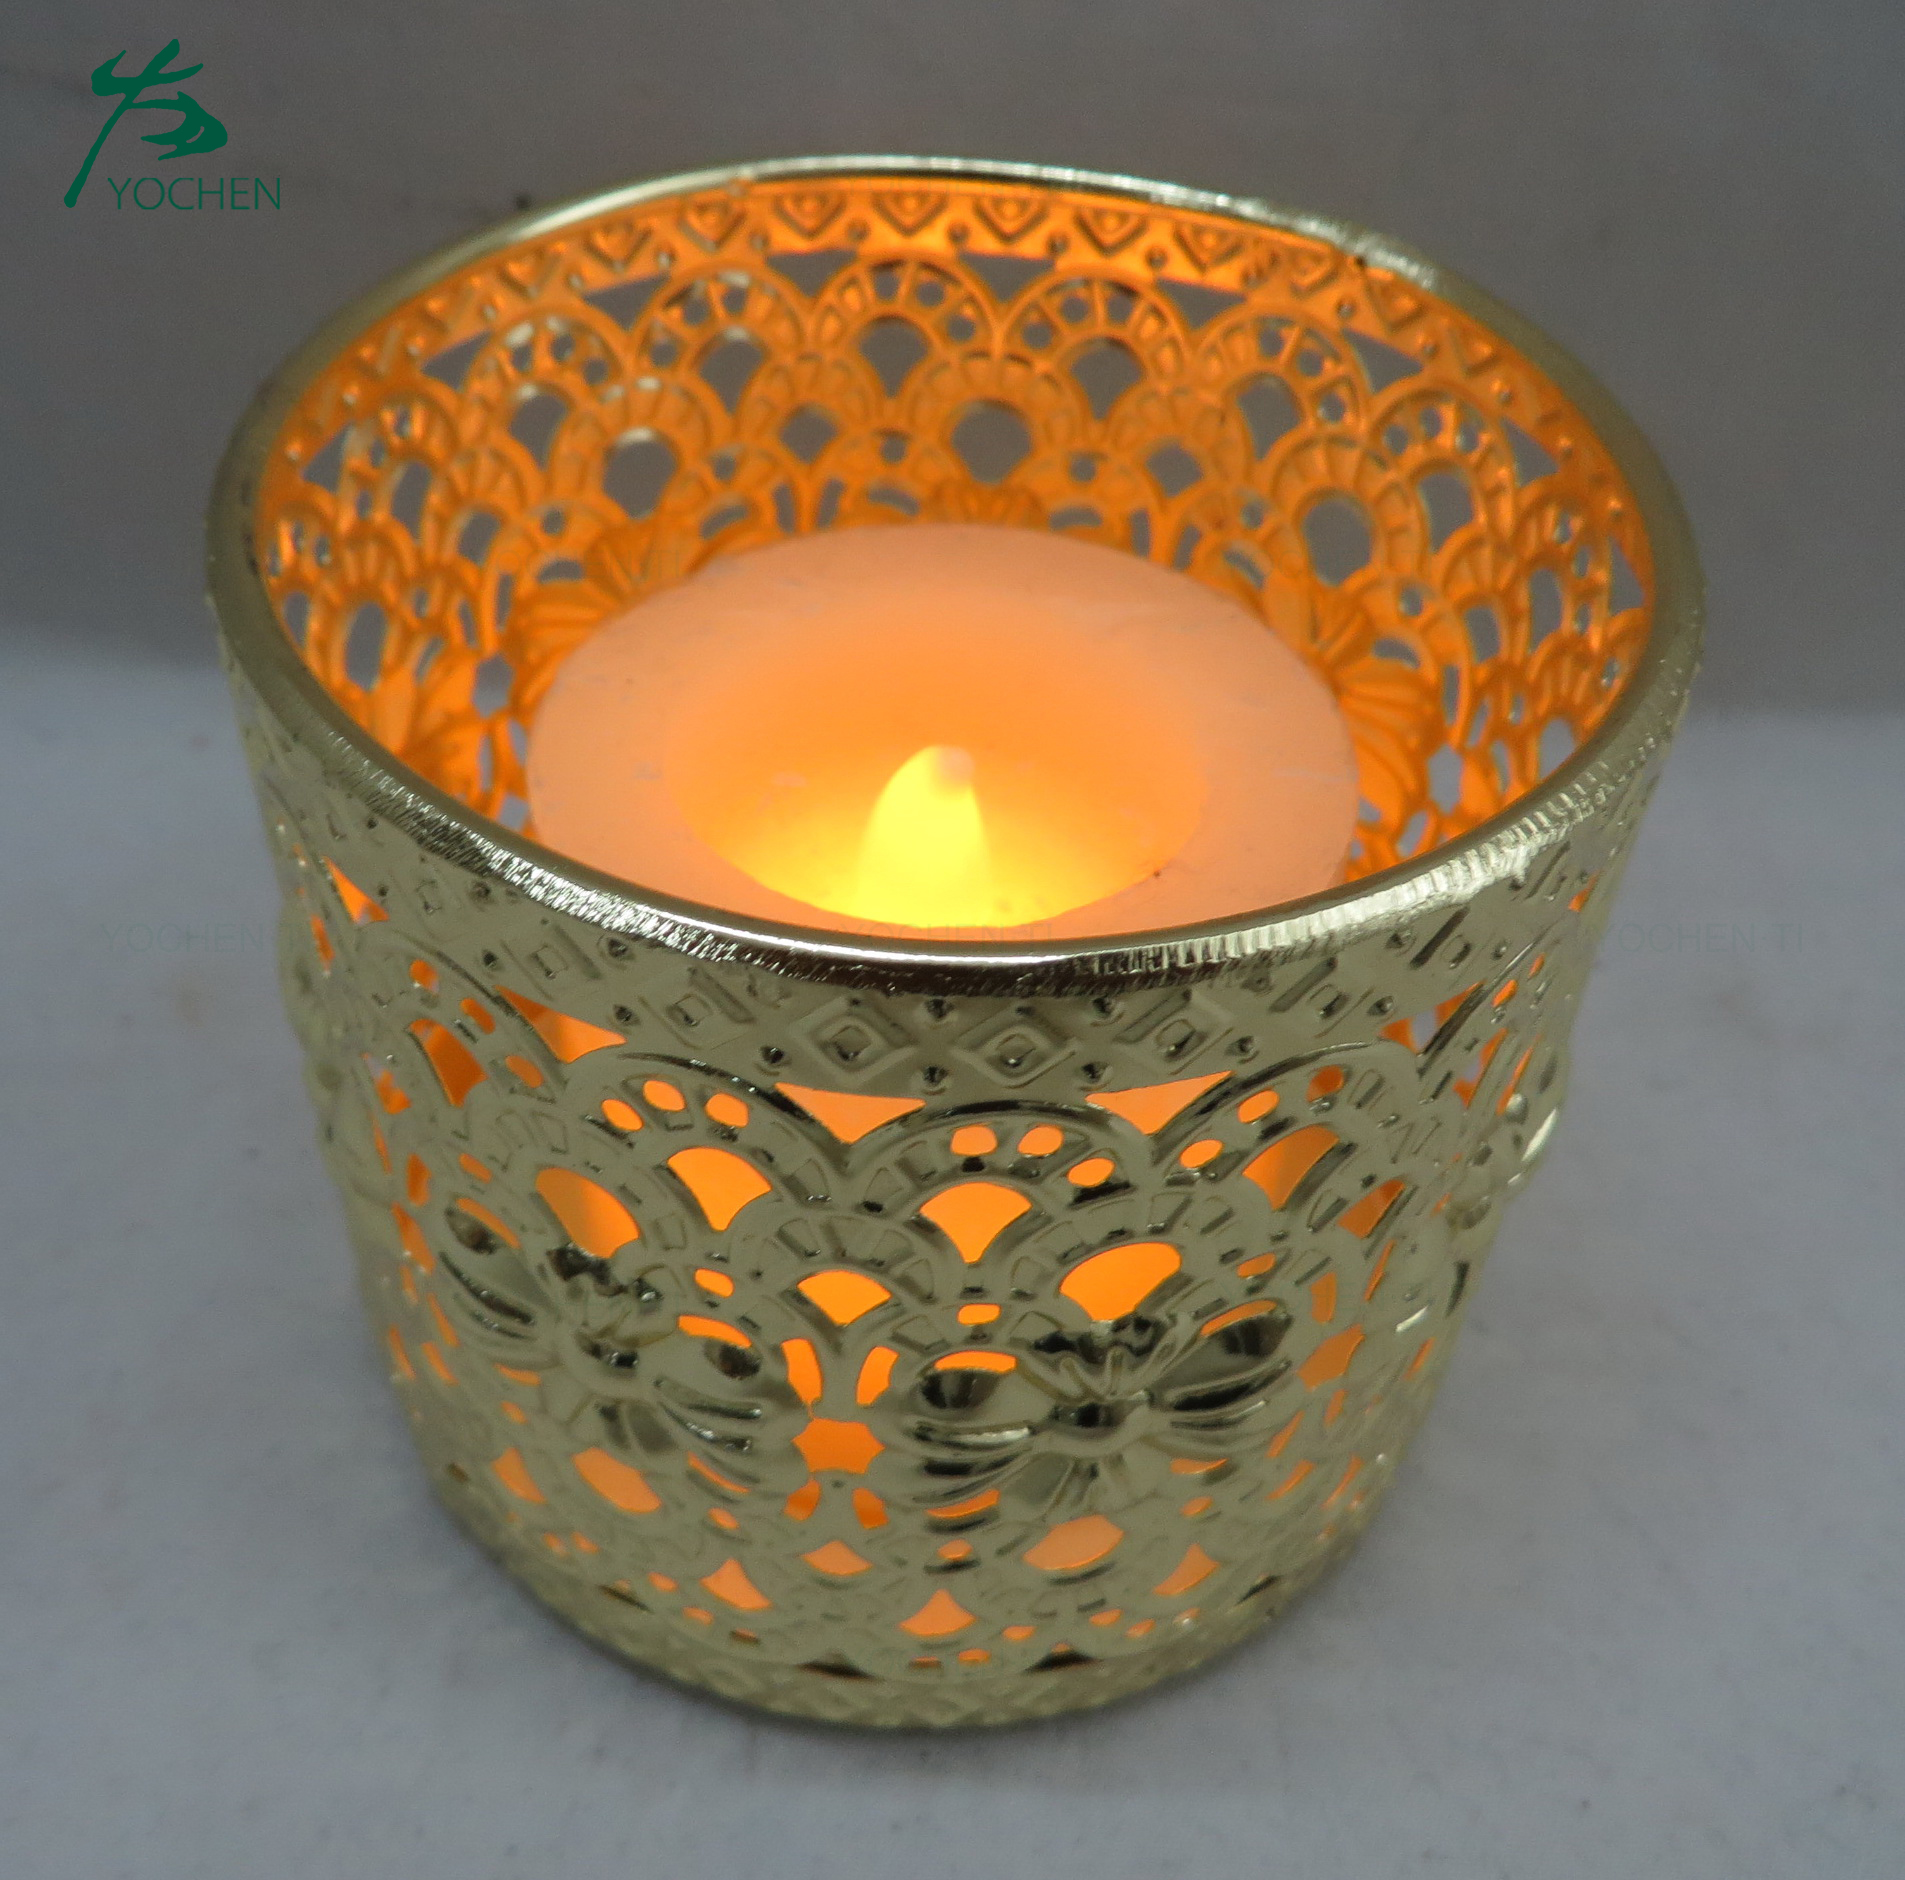 Fancy wall round metal candle holder for home decoration